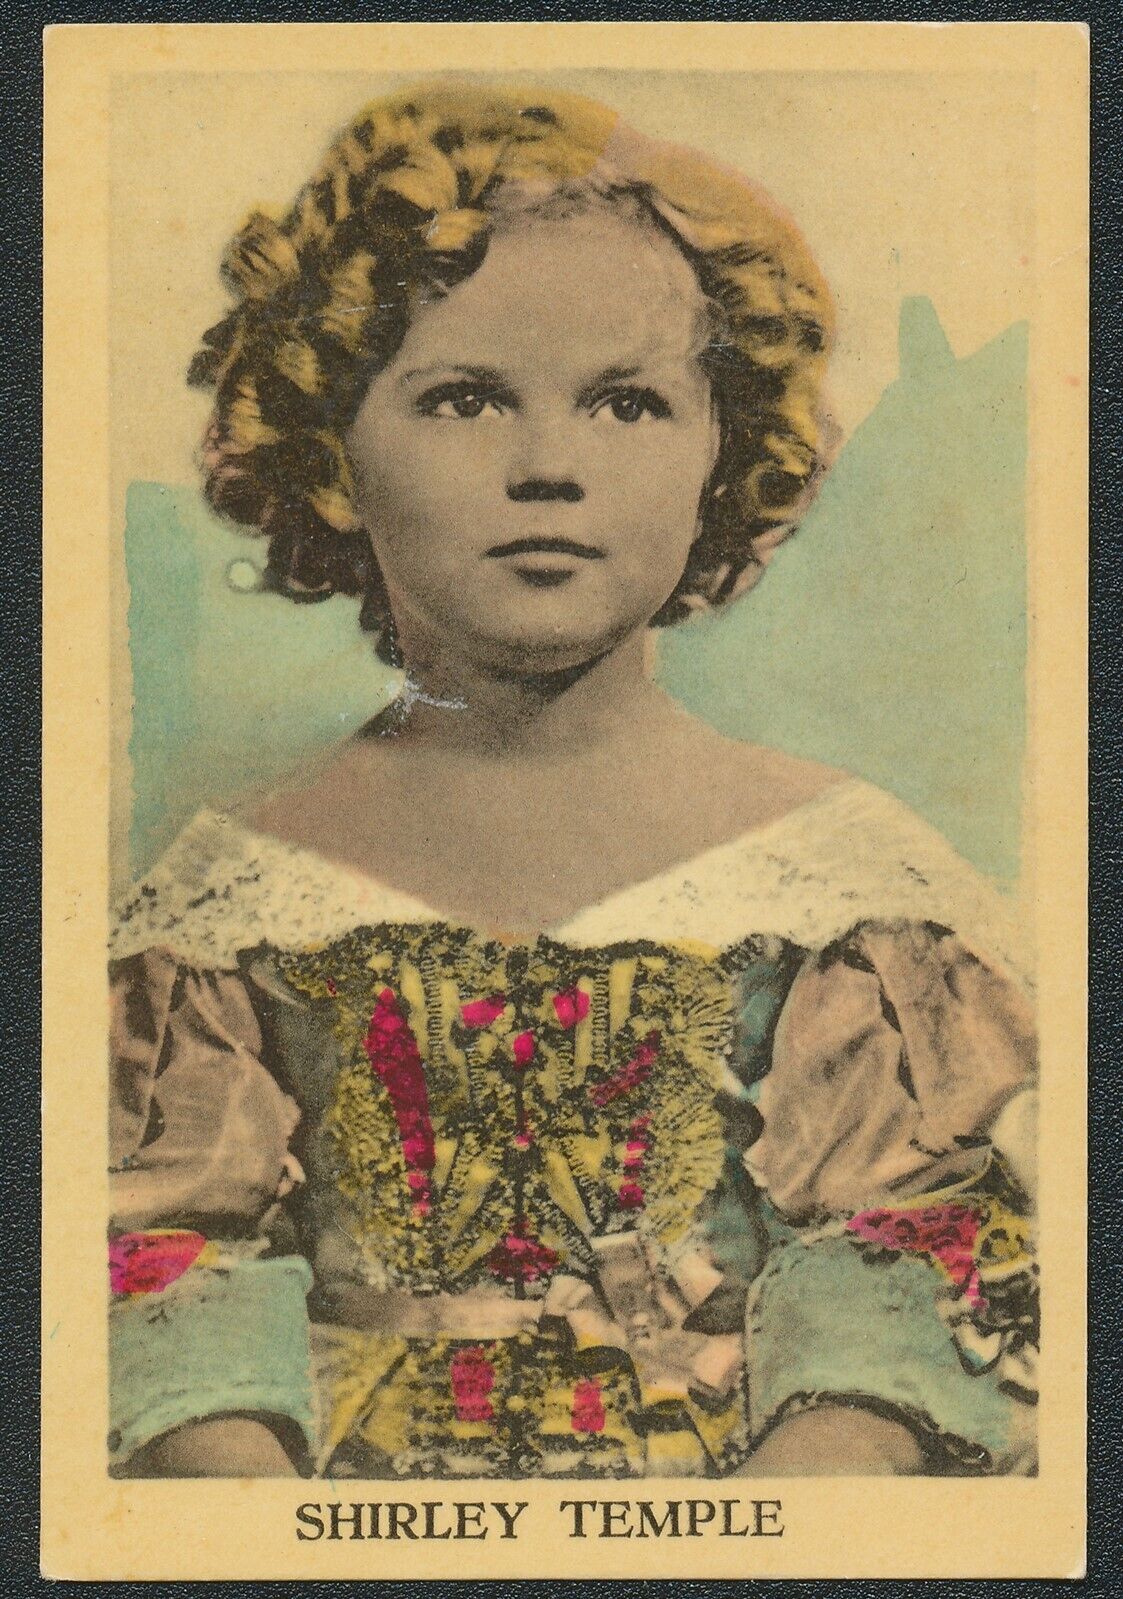 VINTAGE SHIRLEY TEMPLE COLORIZED 2 3/4 x 3 1/2 PHOTO CARD AE - NICE